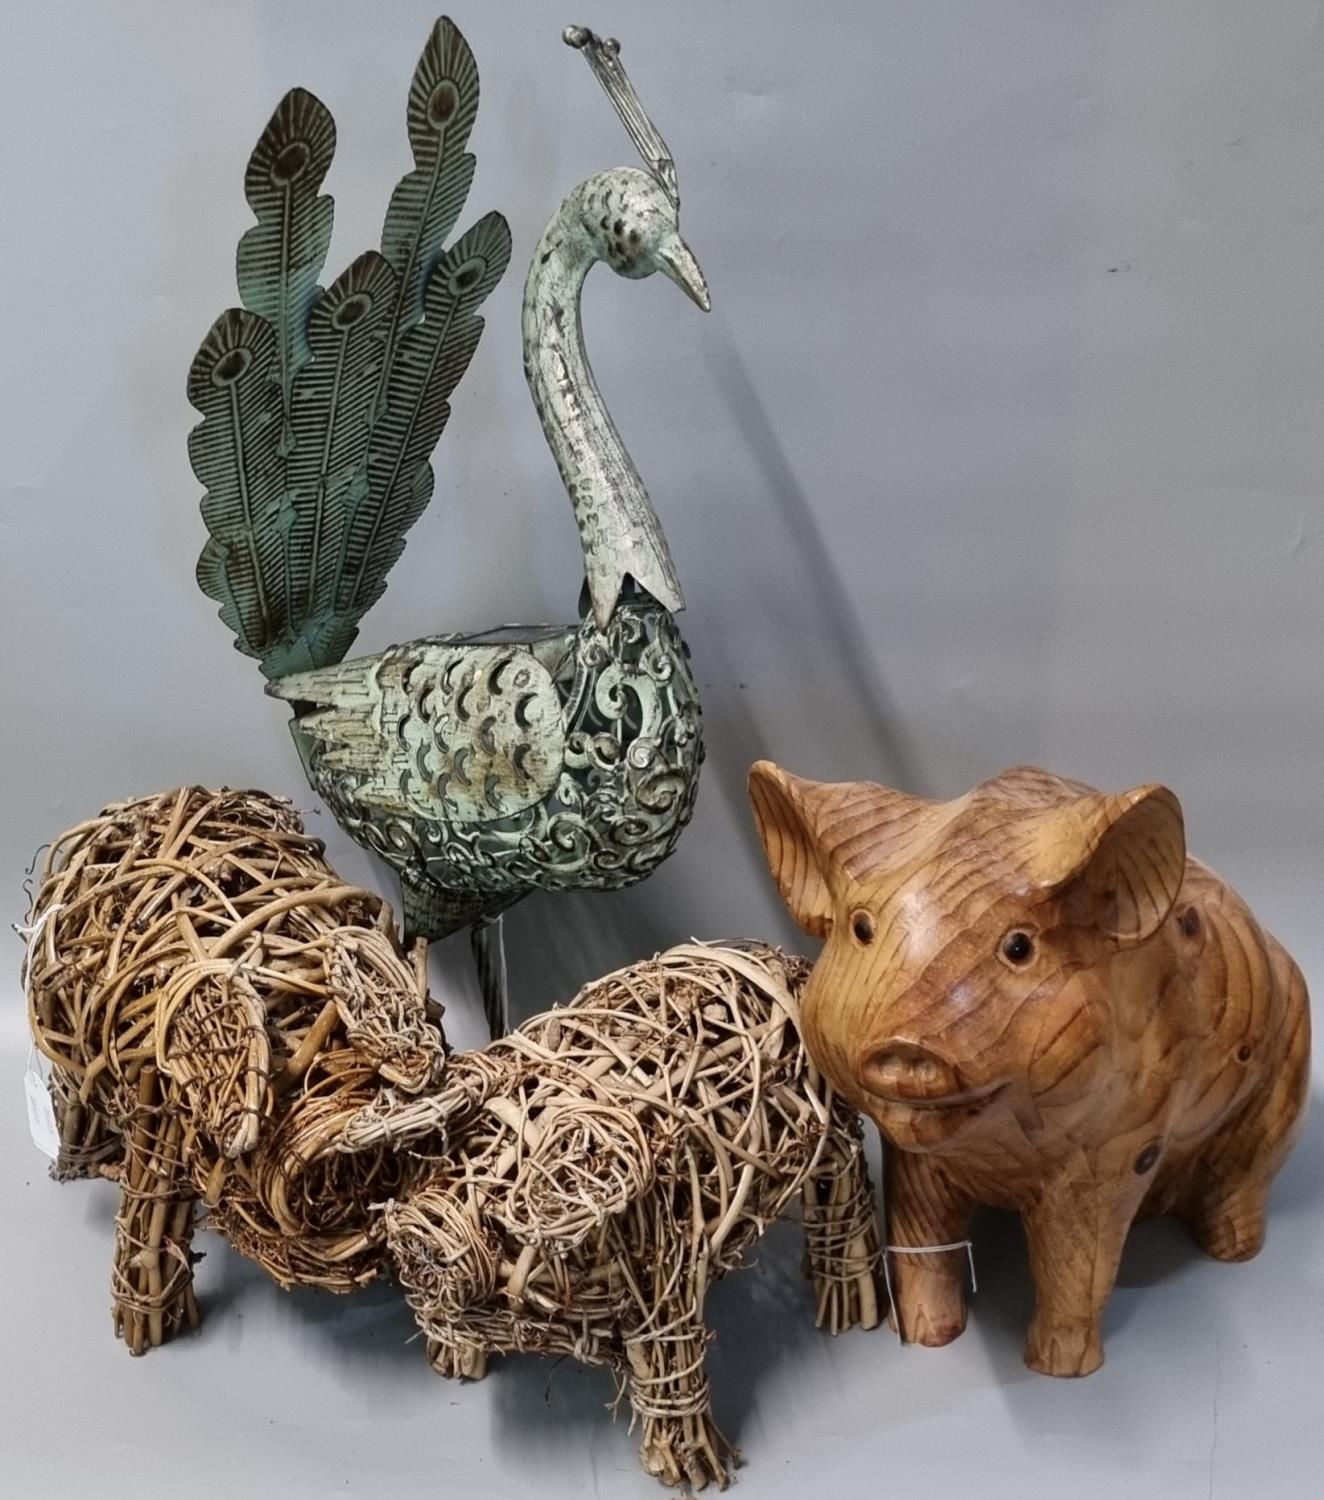 Two wicker models of pigs together with another carved wooden seated pig with glass eyes and a metal